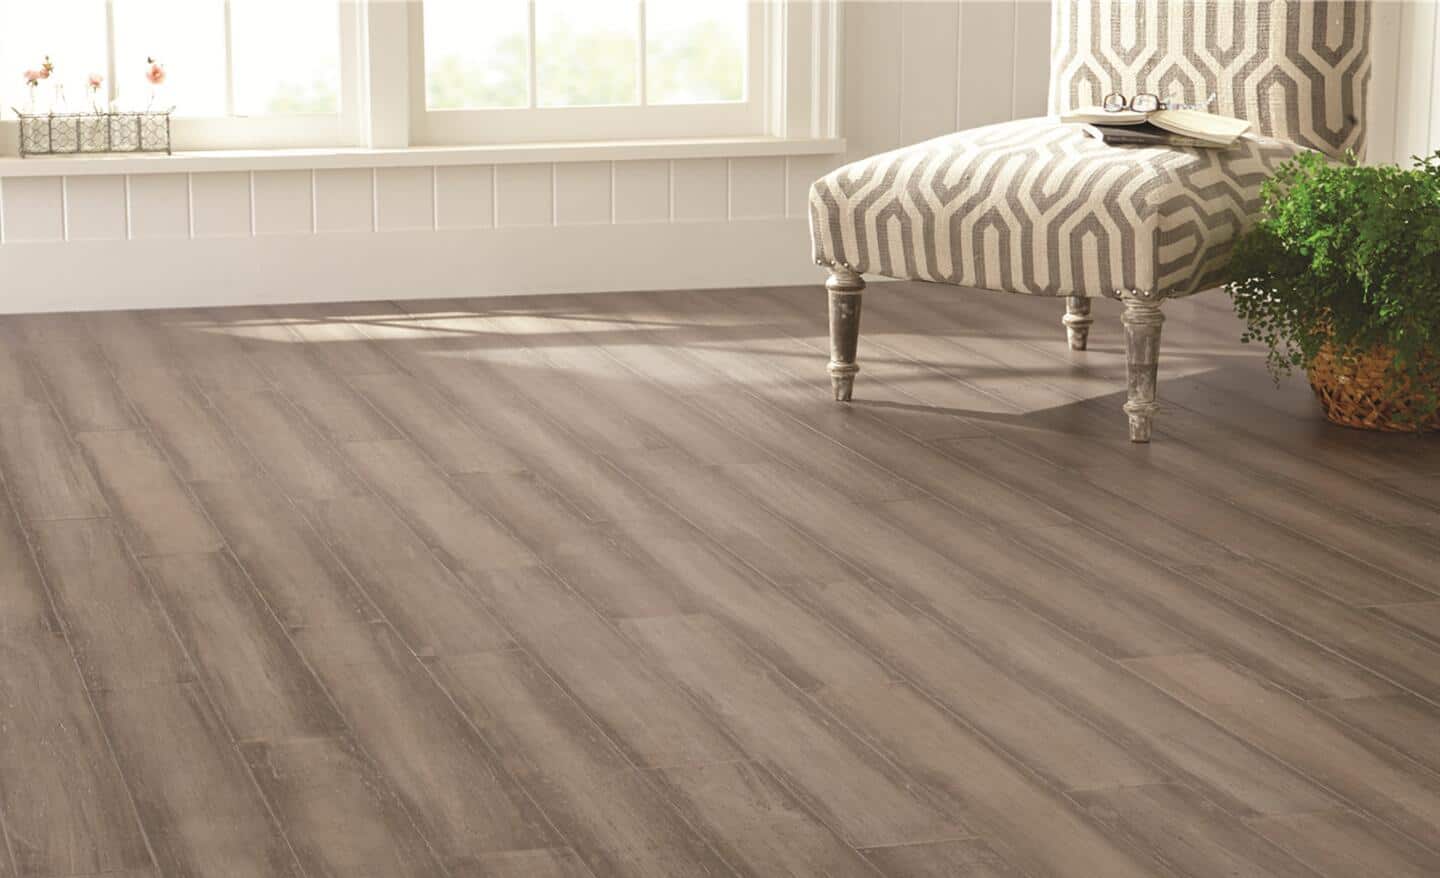 Flooring featuring a wood look.